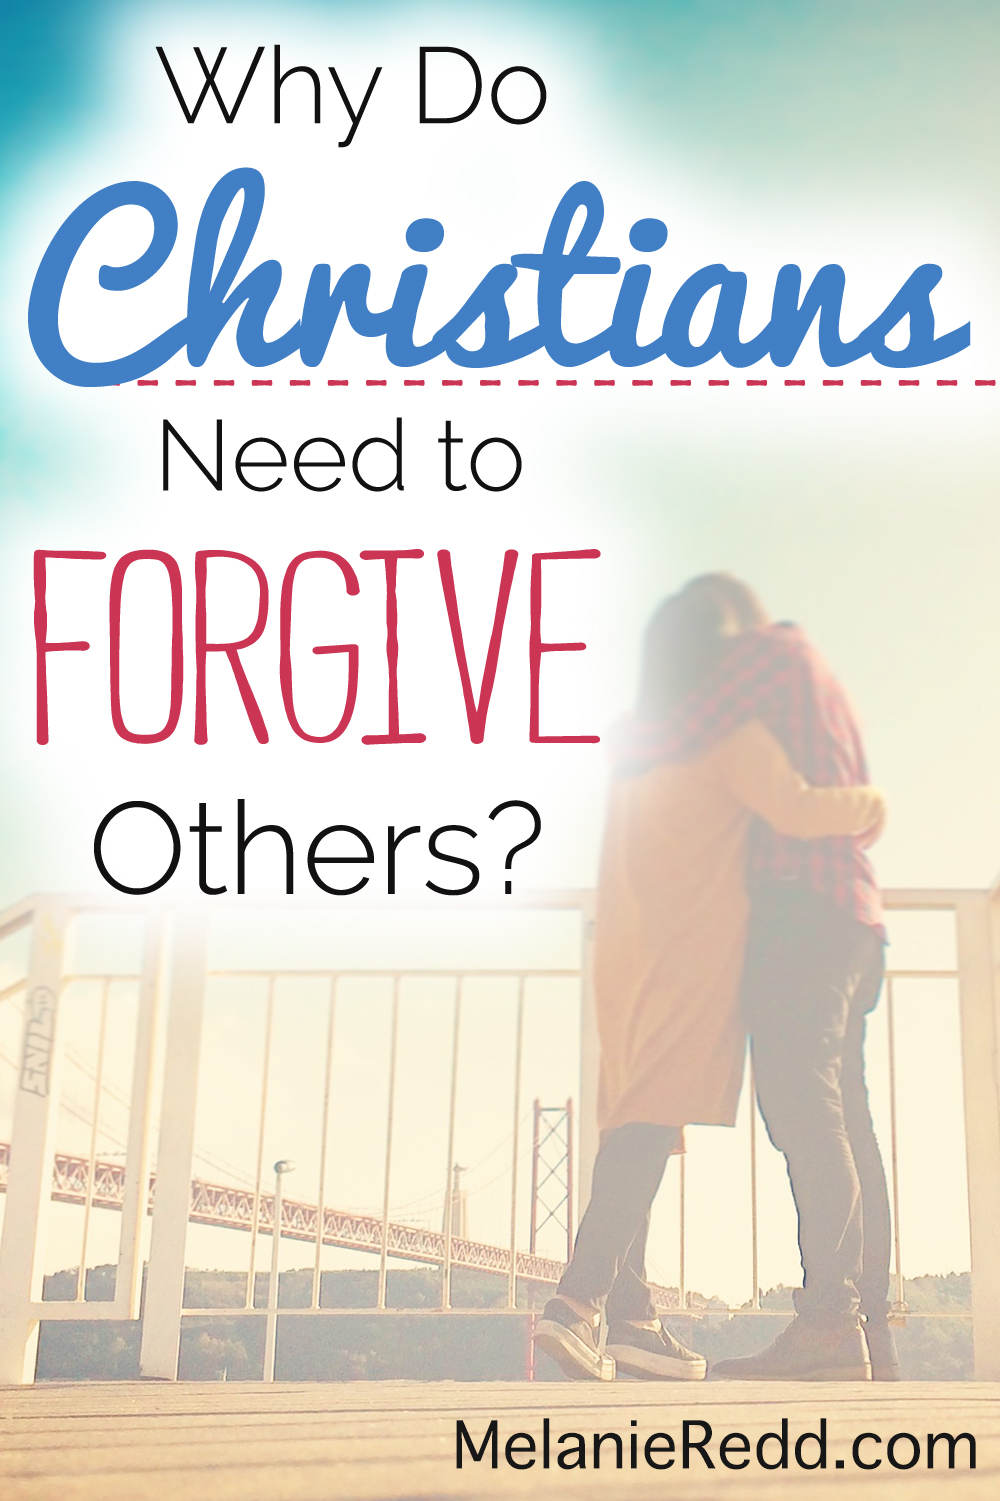 Being wounded, offended, mistreated, and even betrayed are all a part of life. Even in the lives of believers, there is so much forgiving we must do. Why should we forgive? What does the Bible say about forgiveness? How can we truly do it? Join us for this practical article that offers scriptures, wisdom, ideas, honest life examples, and even activities for how we can forgive those who have hurt us. If you are nursing a grudge or having a hard time letting go, this post is for you!